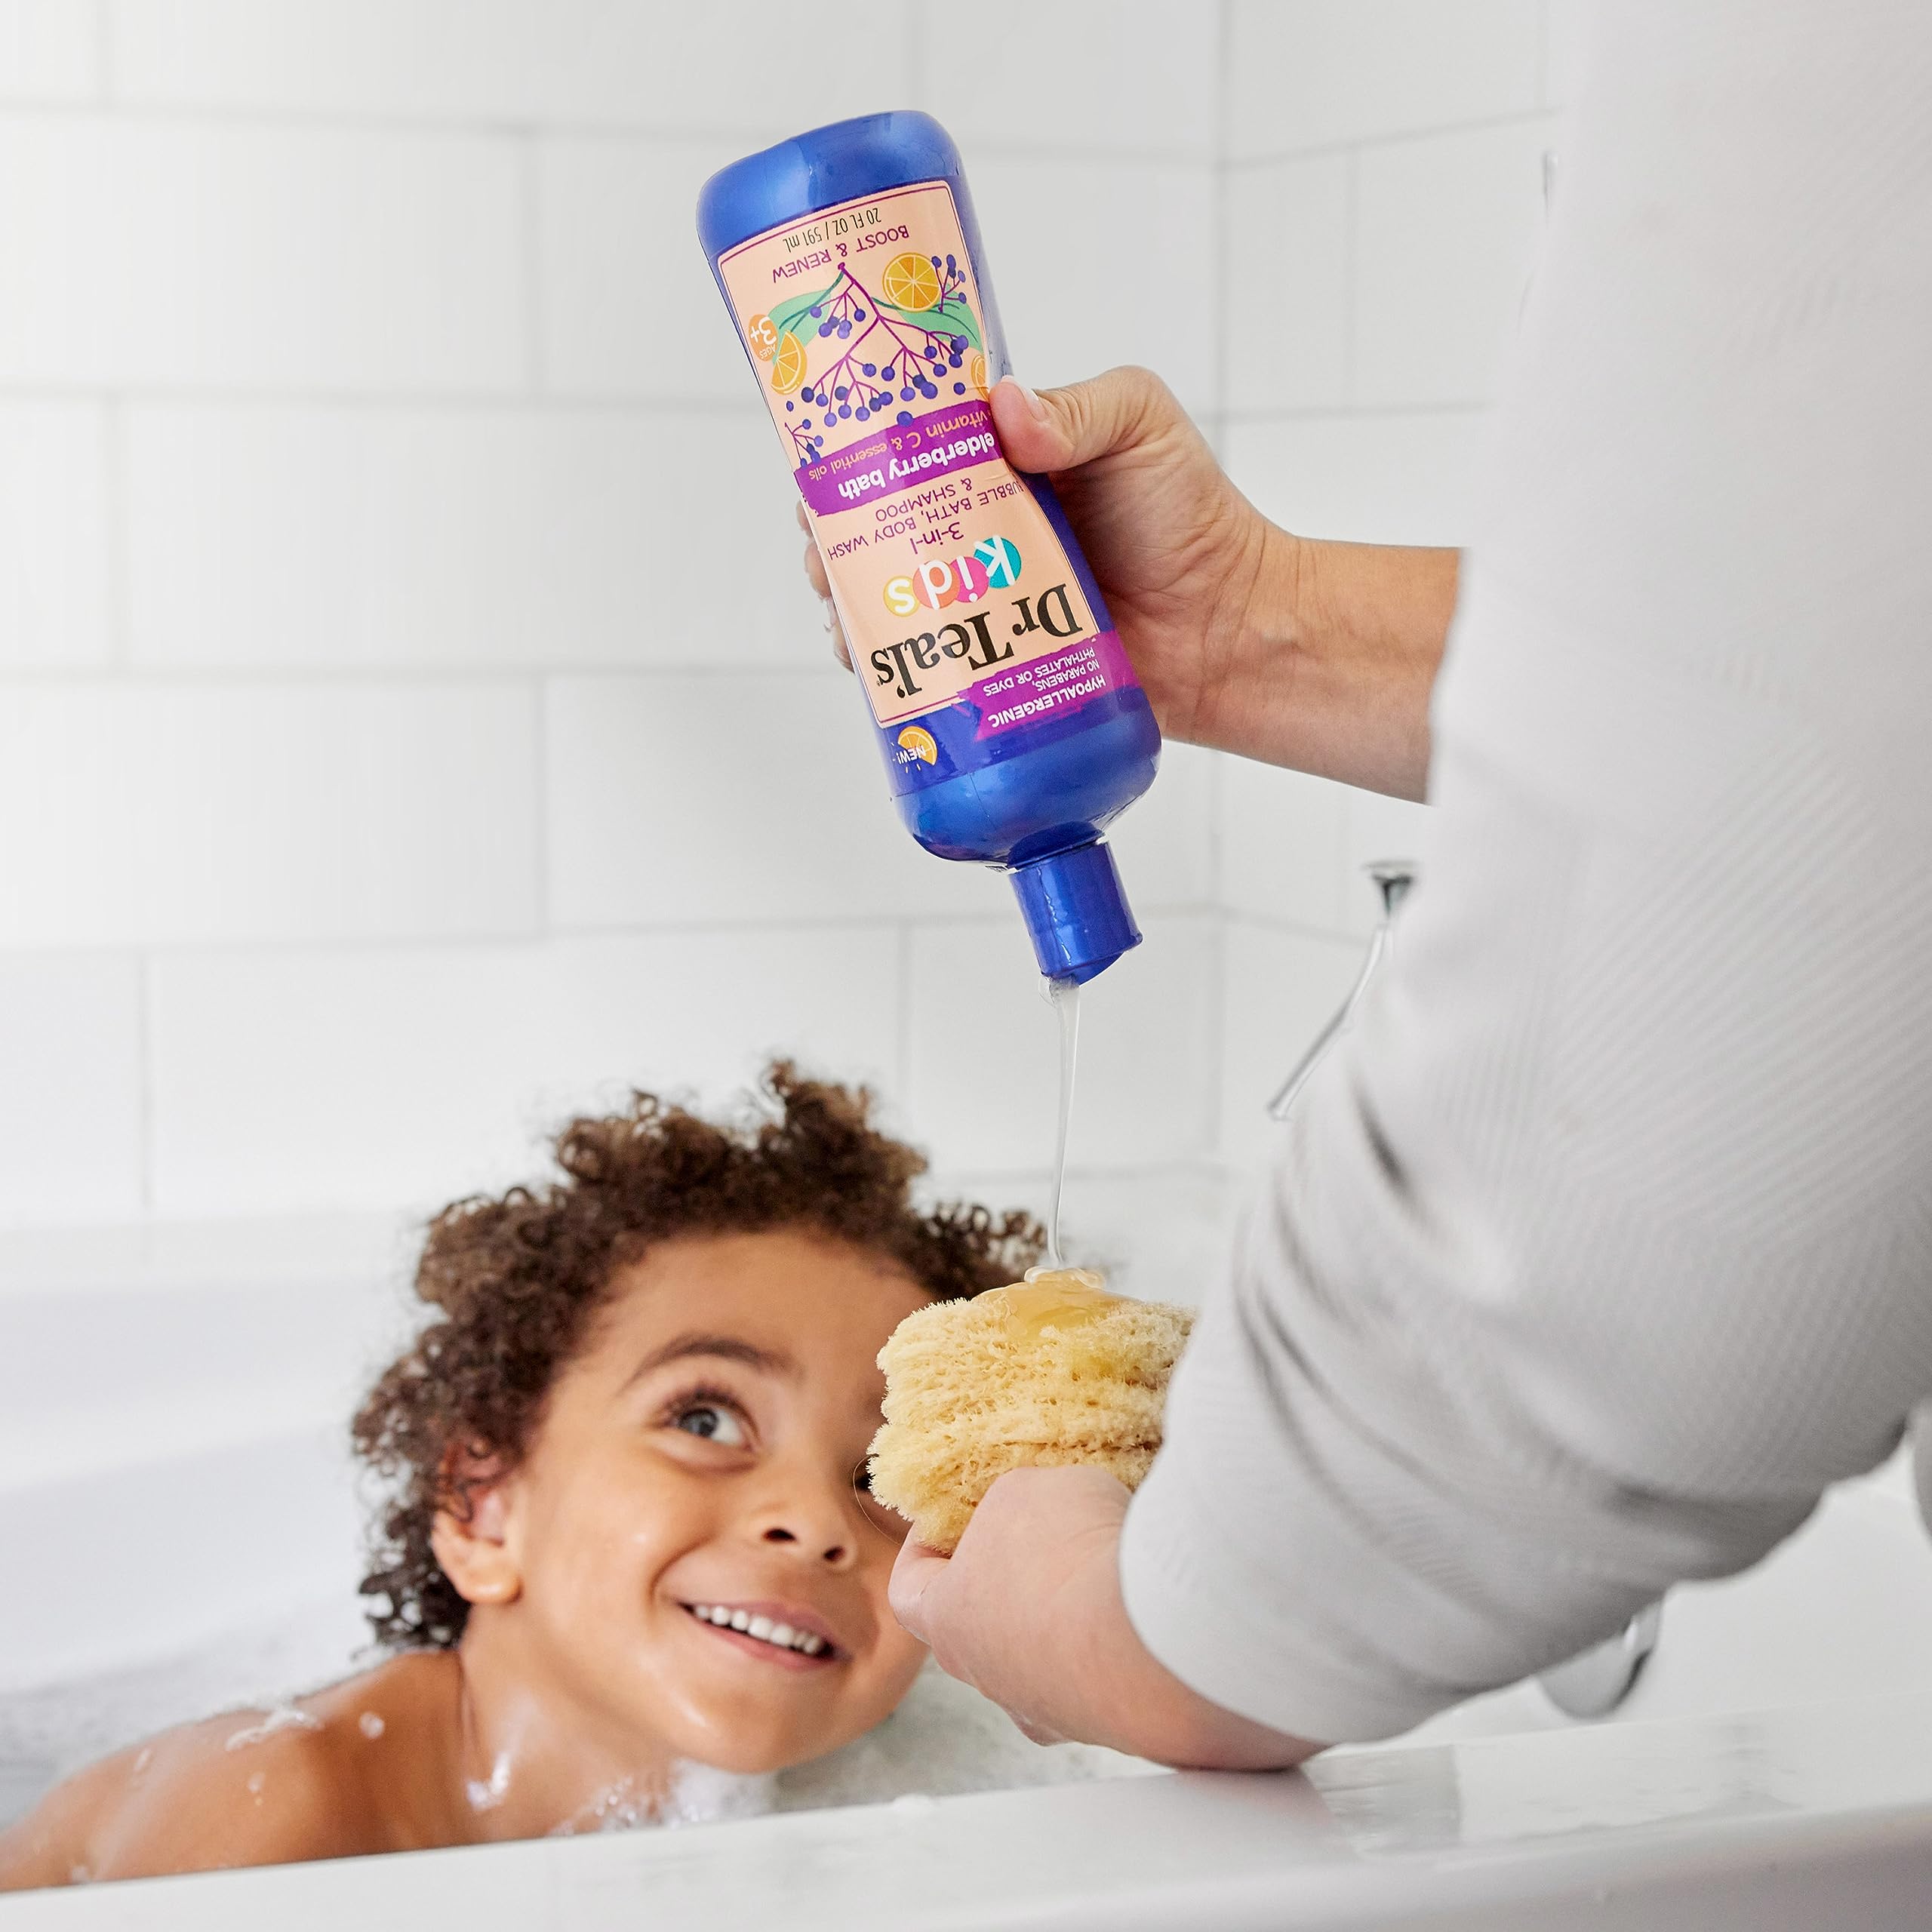 Dr Teal's Kids 3-in-1 Bubble Bath, Body Wash & Shampoo, Boost & Renew Elderberry with Vitamin C, 20 fl oz. (Pack of 3)